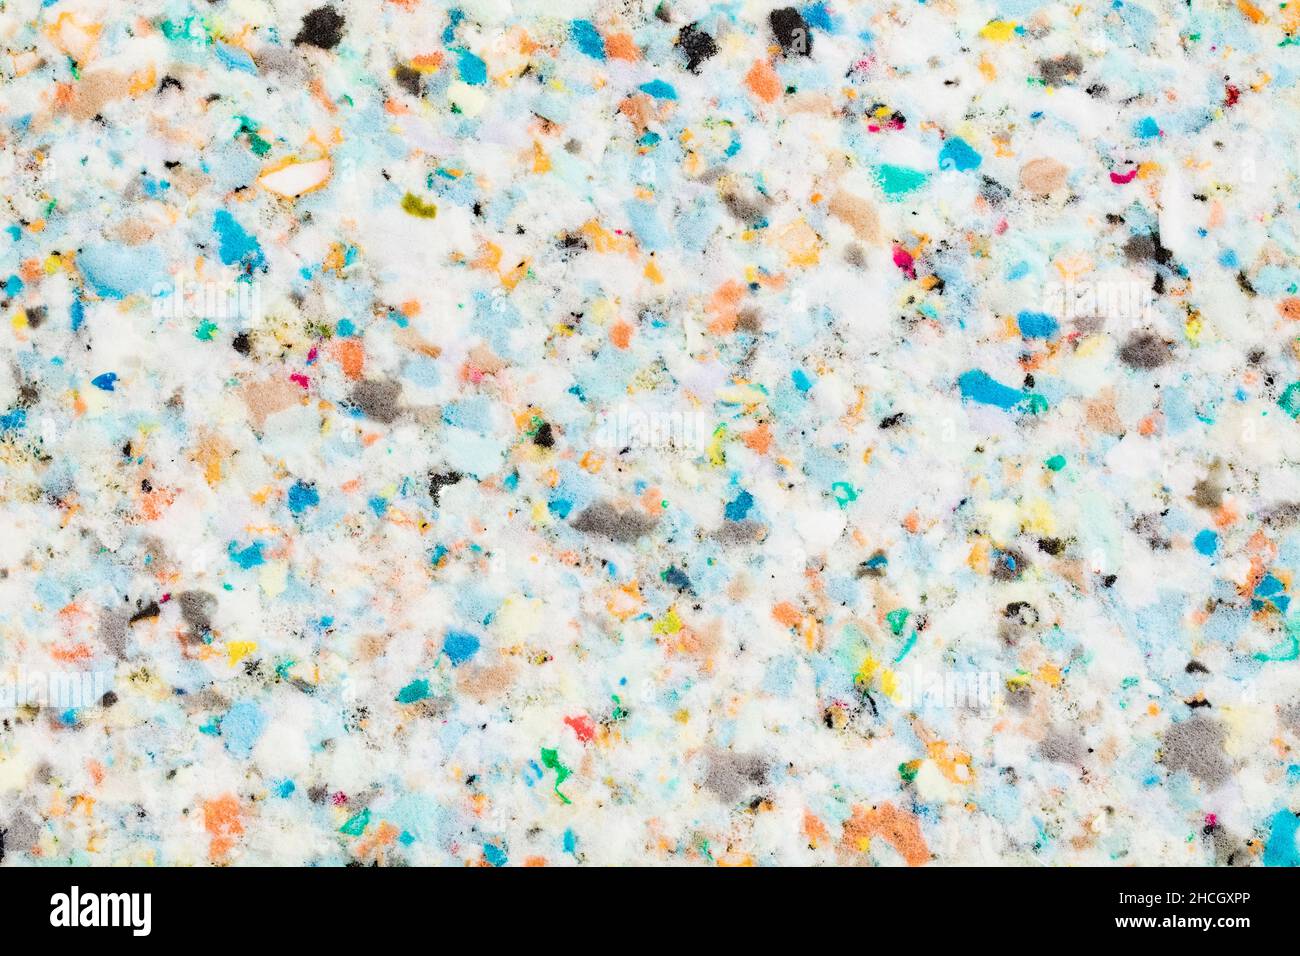 Section of high density foam rubber used in upholstery. Also for confusion, mental illness, the mind, shattered dreams, Covid 19 mental health. Stock Photo